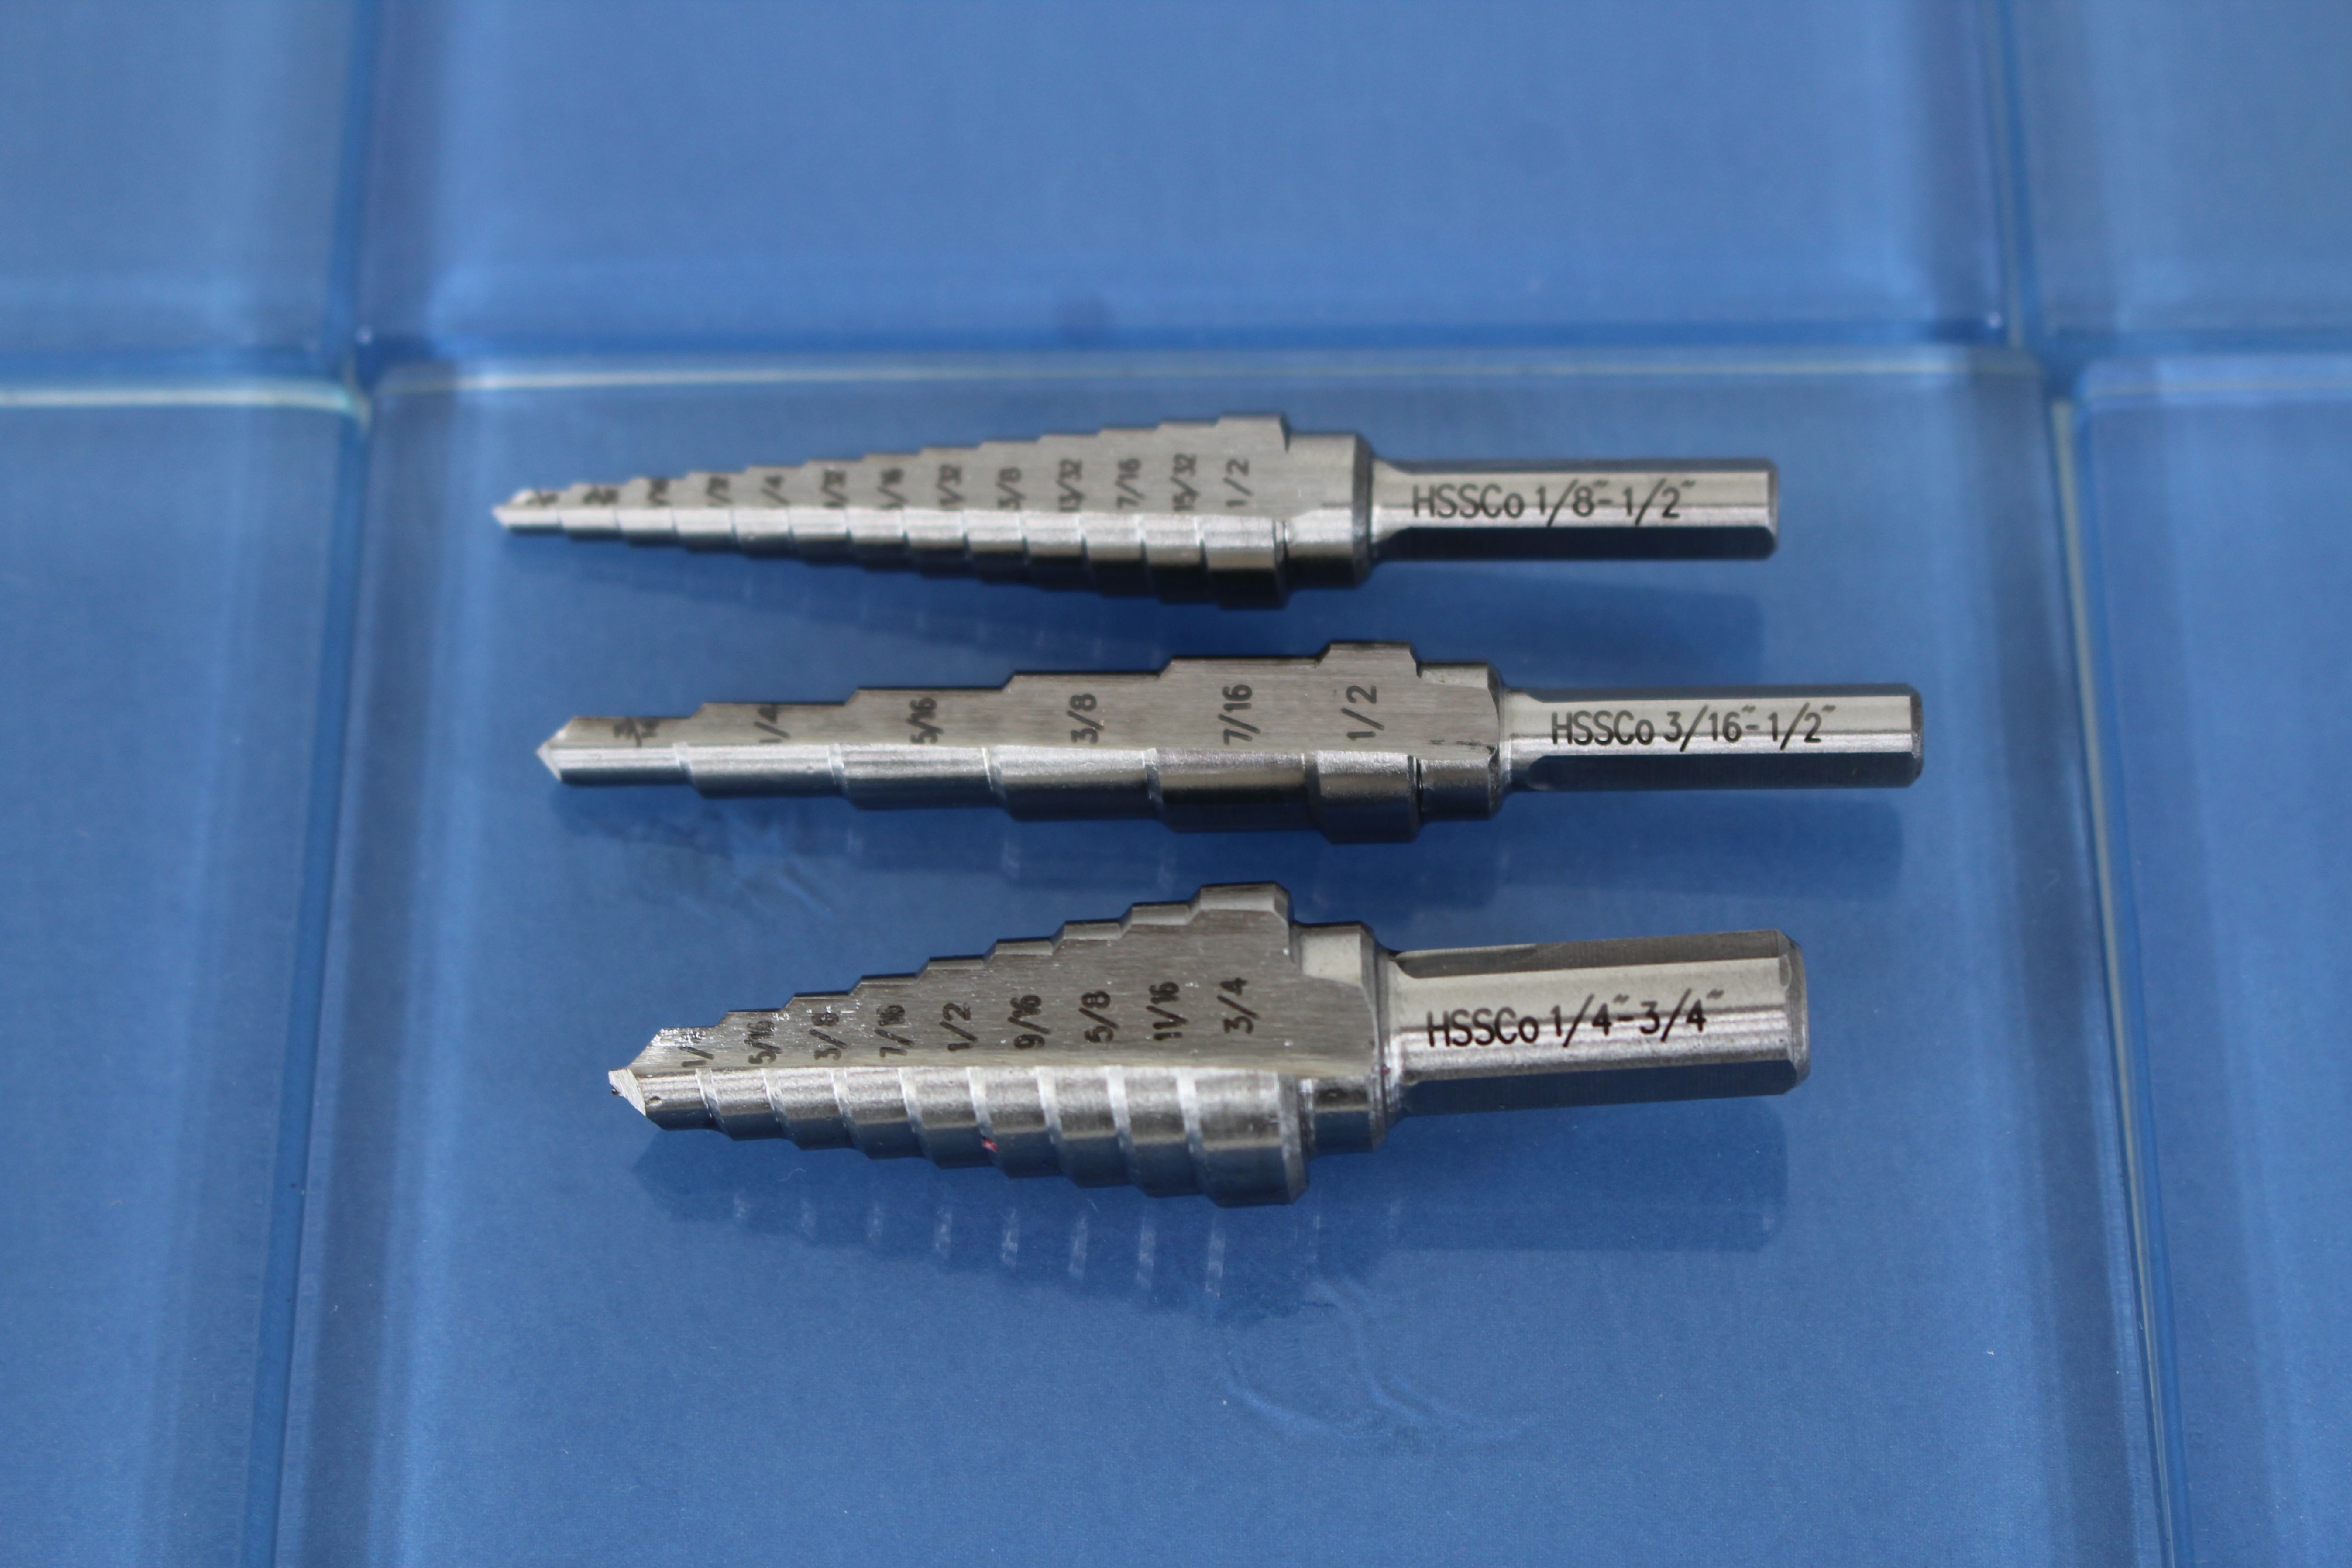 TEMO 3pc M35 Cobalt HSS Step Drill Set Two Flute Total 28 Sizes (3/16"-1/2" 6 step, 1/4"-3/4" 9 step, 1/8"-1/2" 13 step) - image 3 of 3